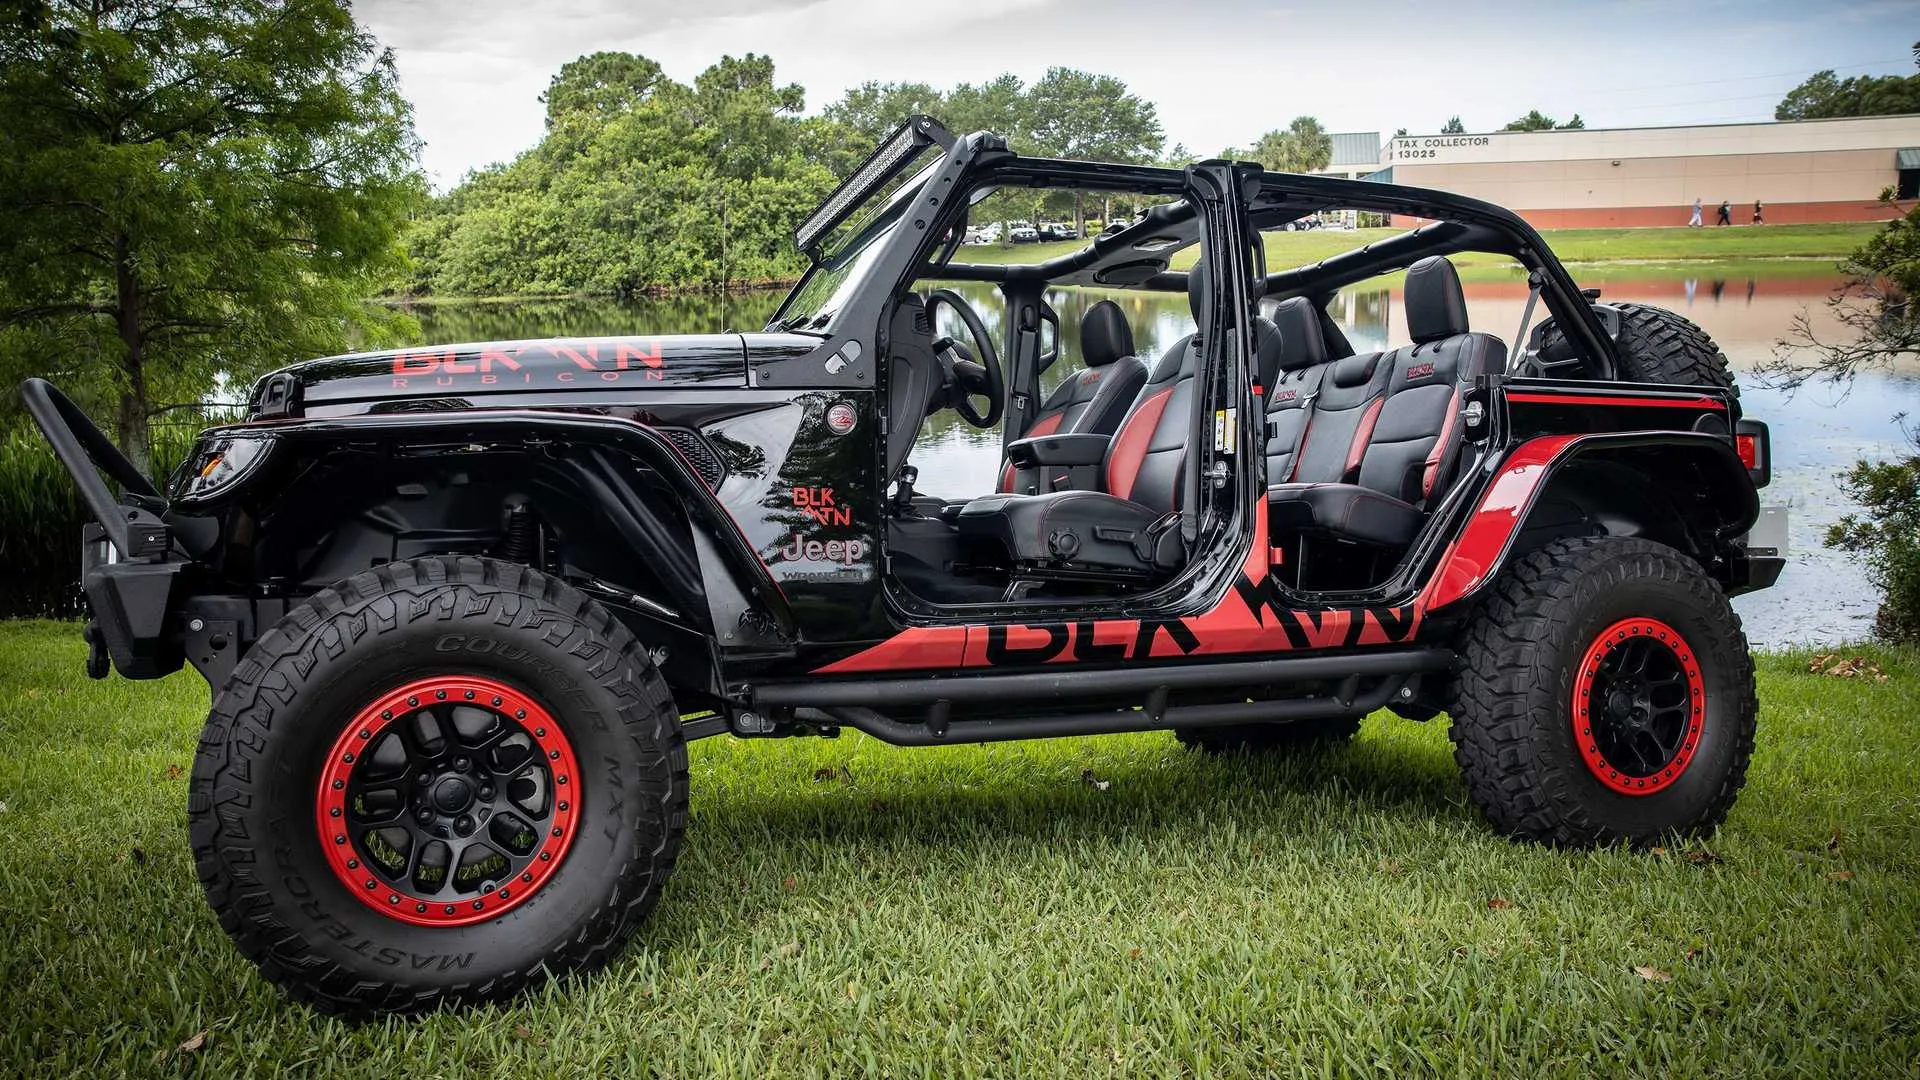 Only 1 Day Left To Enter To Win This Custom Jeep Wrangler Plus 15 …